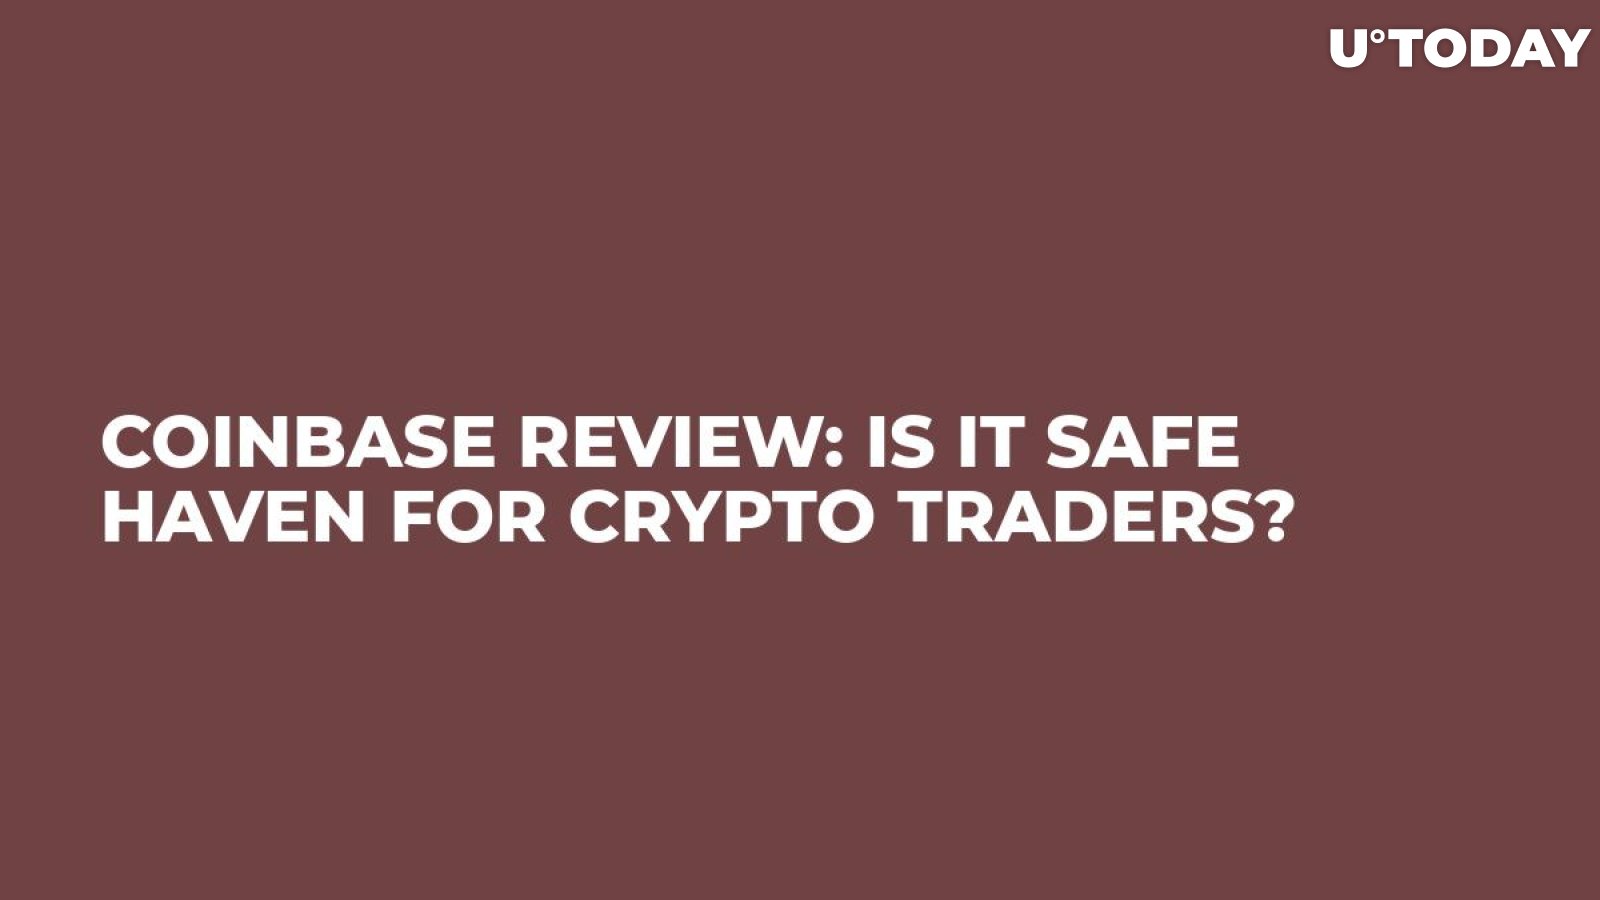 Coinbase Review: Is It Safe Haven for Crypto Traders?